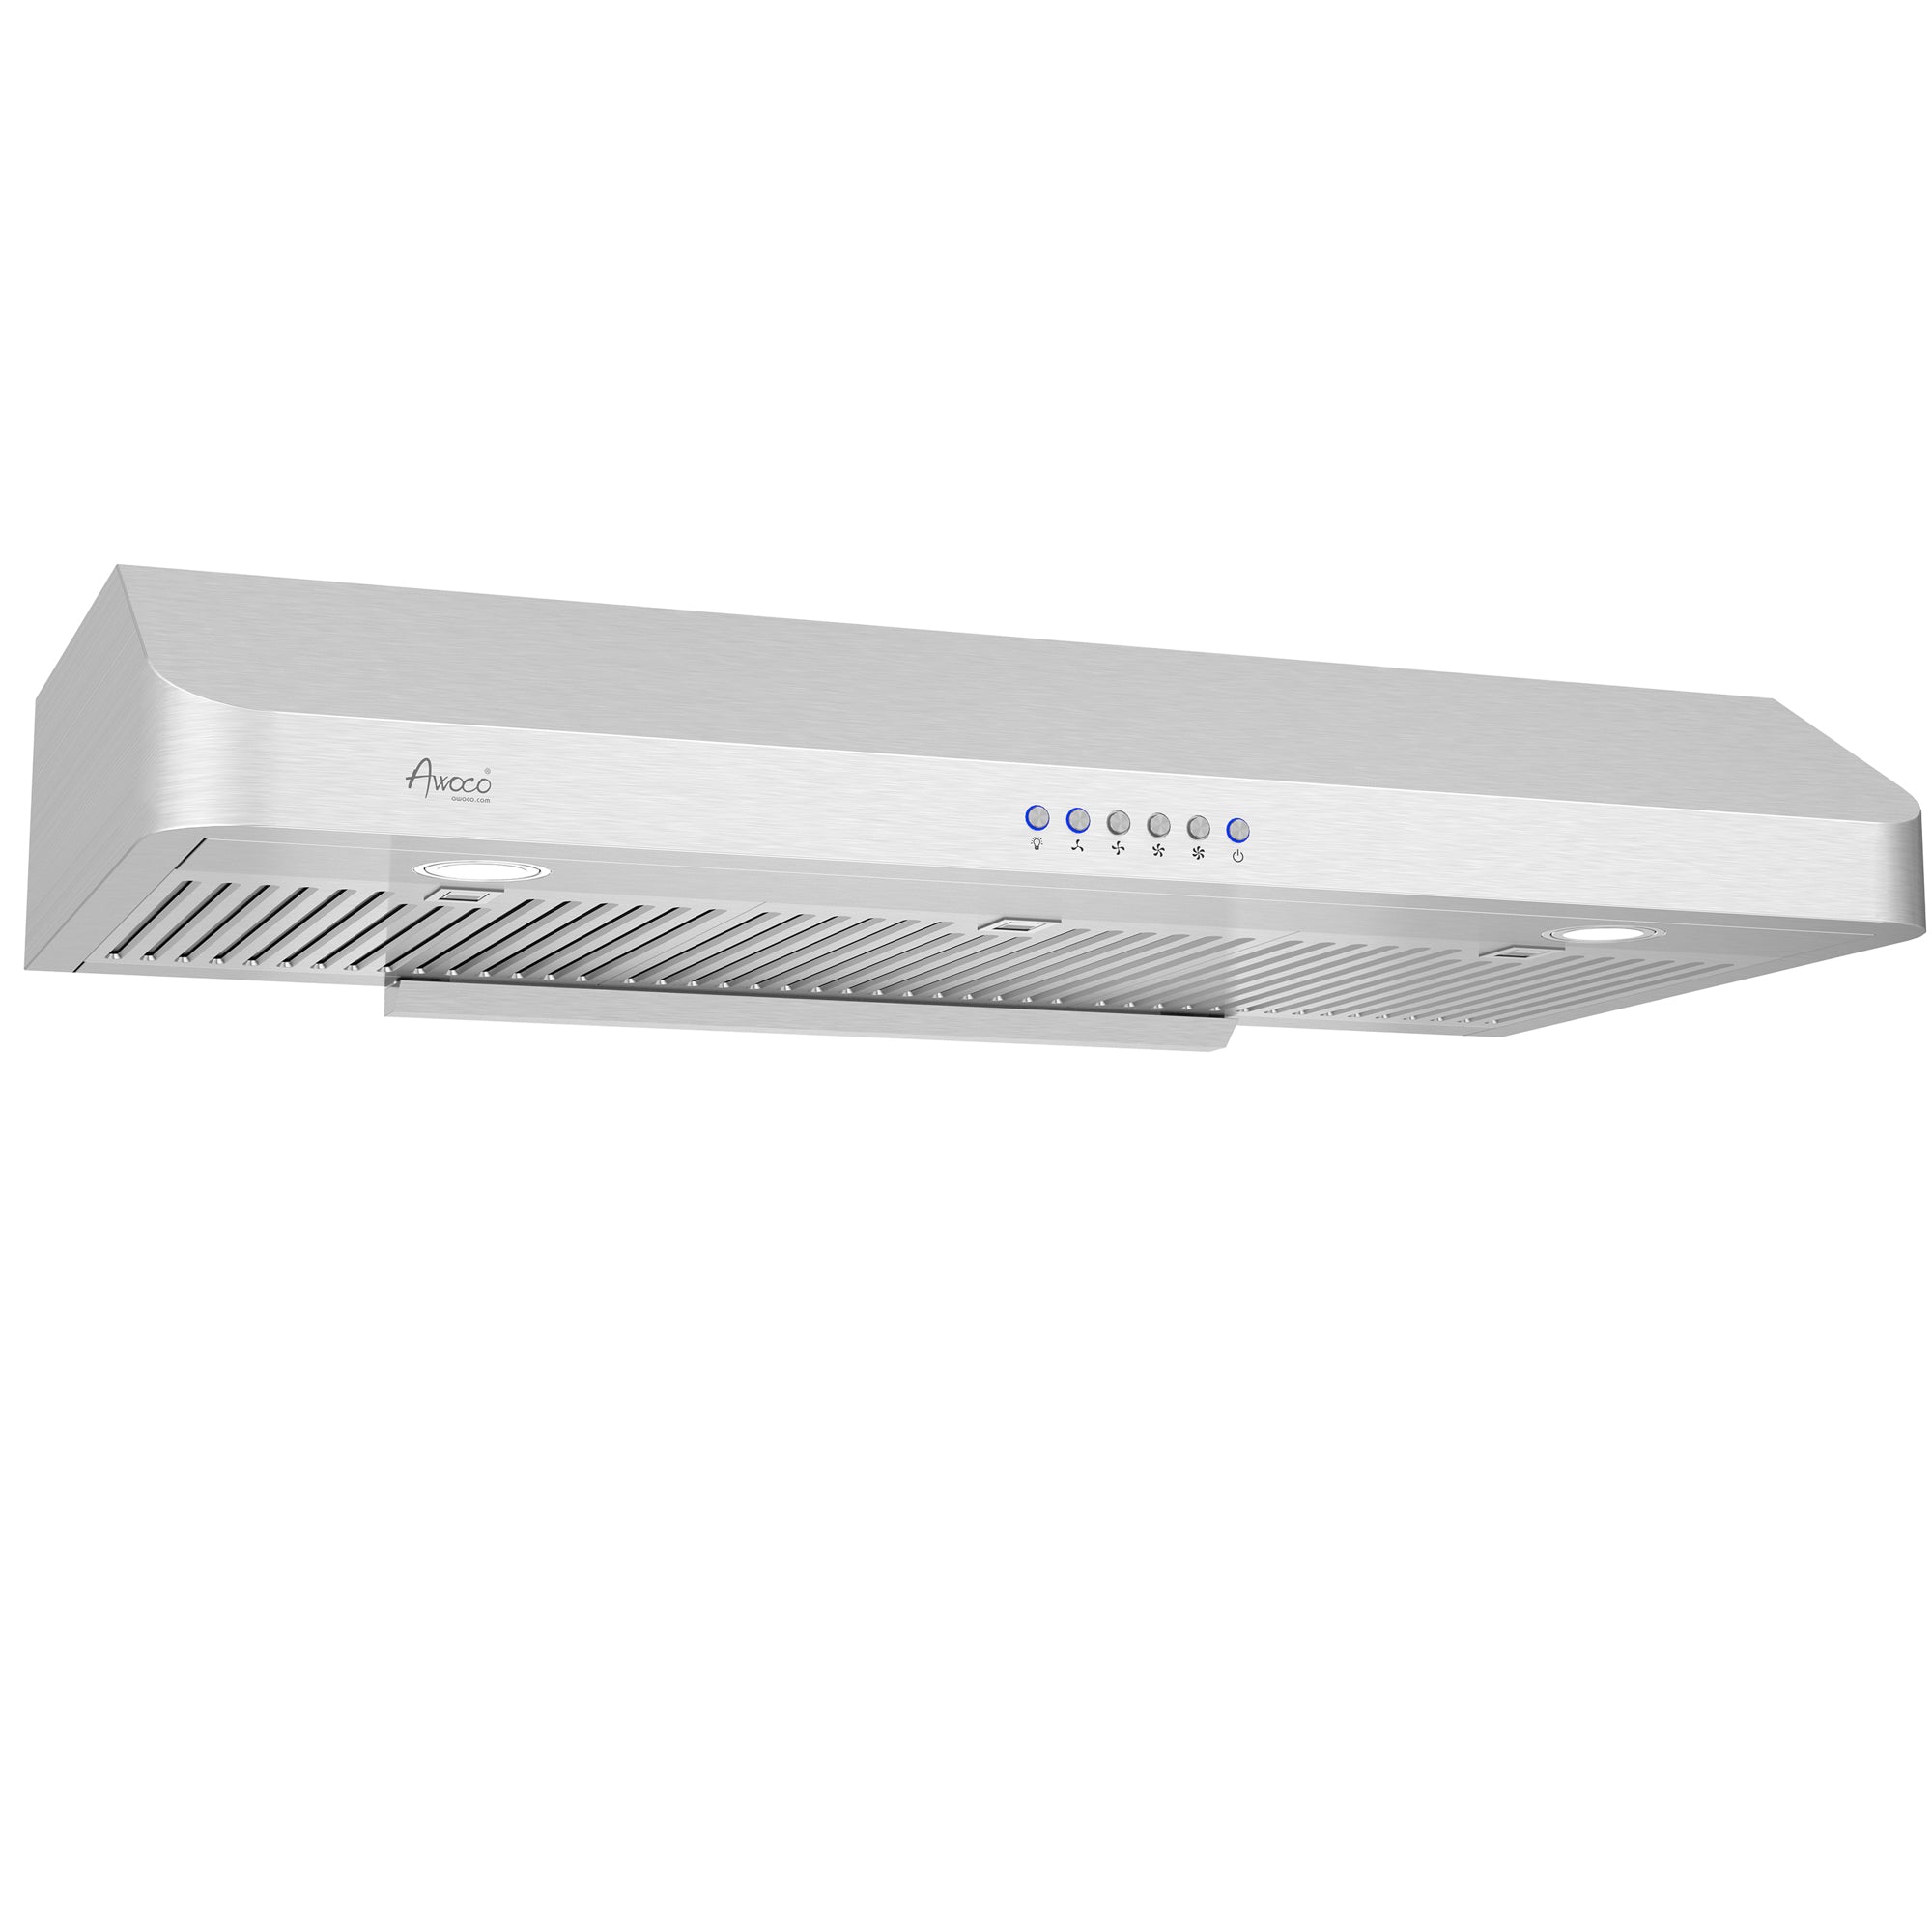 Awoco RH-C06-36 Classic 6" High Stainless Steel Under Cabinet 4 Speeds 900CFM Range Hood with 2 LED Lights Top Vent (36"W Top Vent)